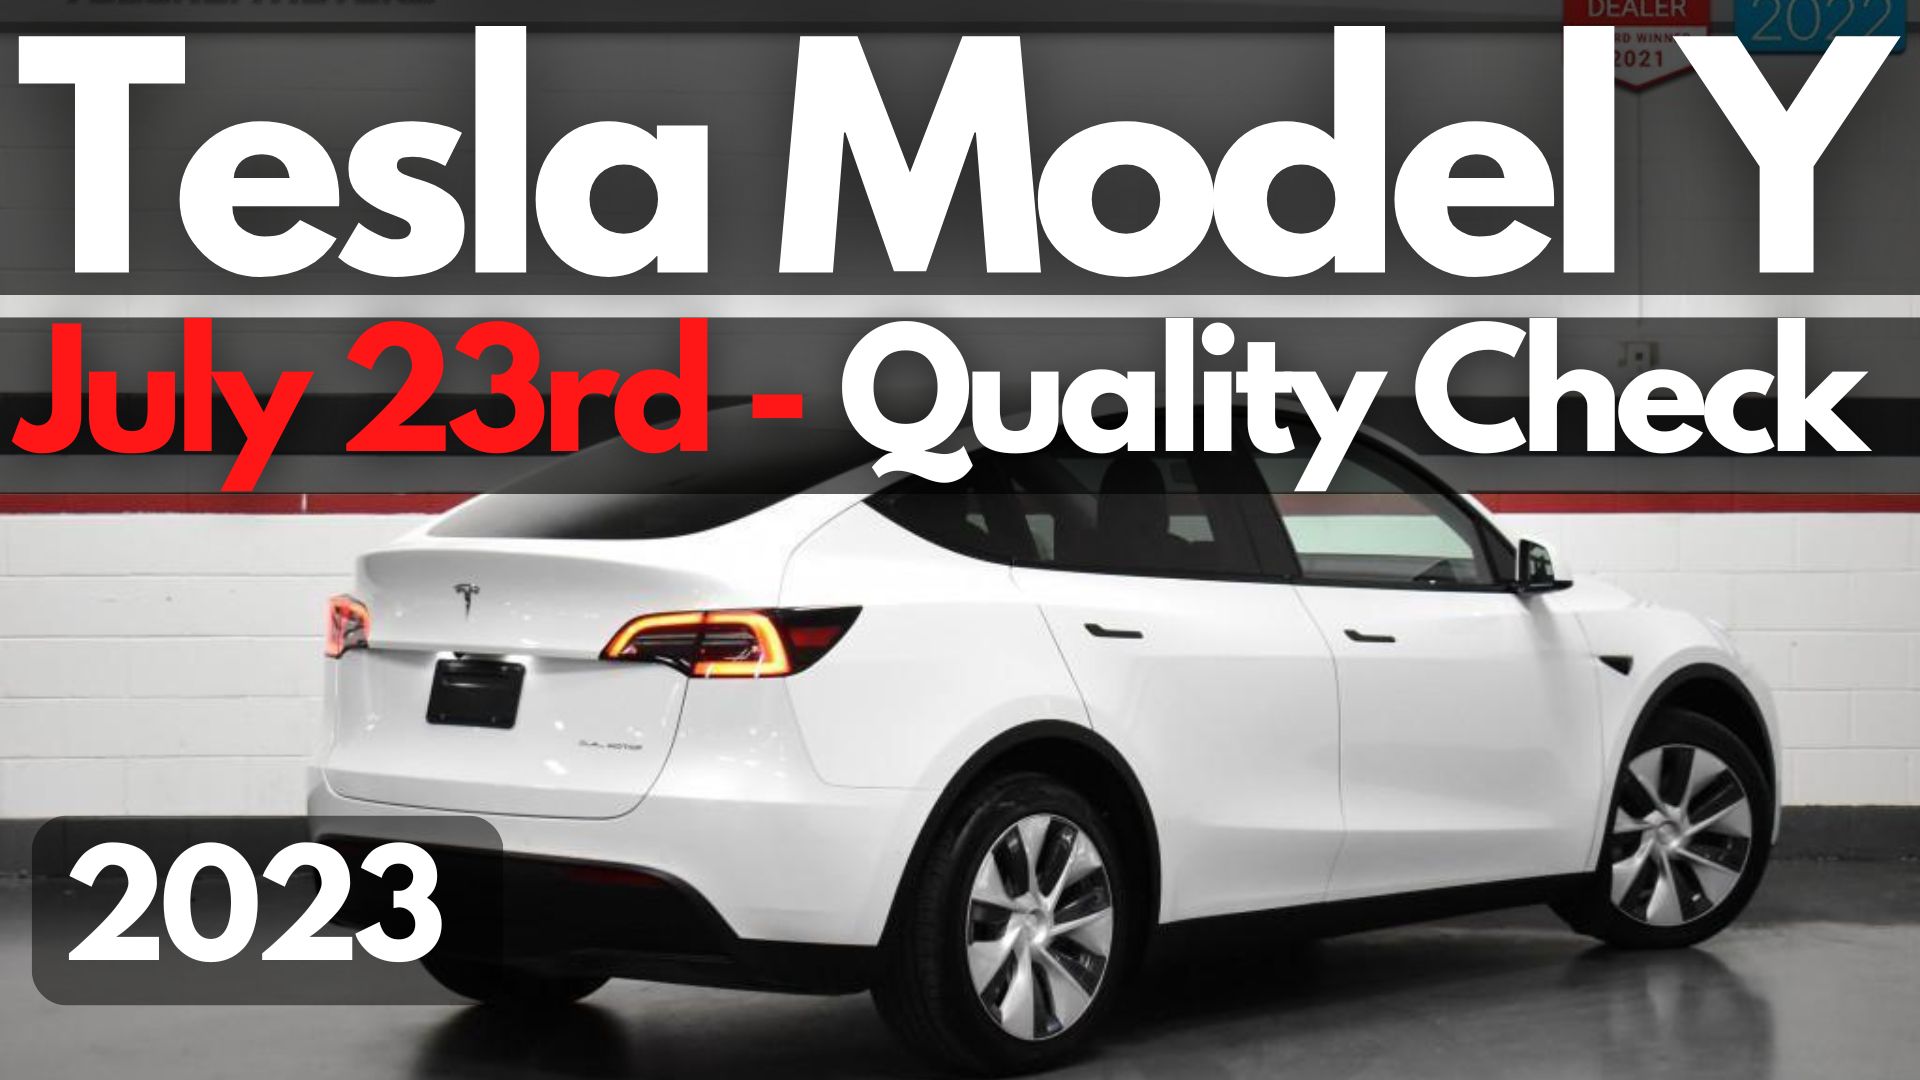 Has Tesla Improved The Model Y Build Quality For July 23, 2023?